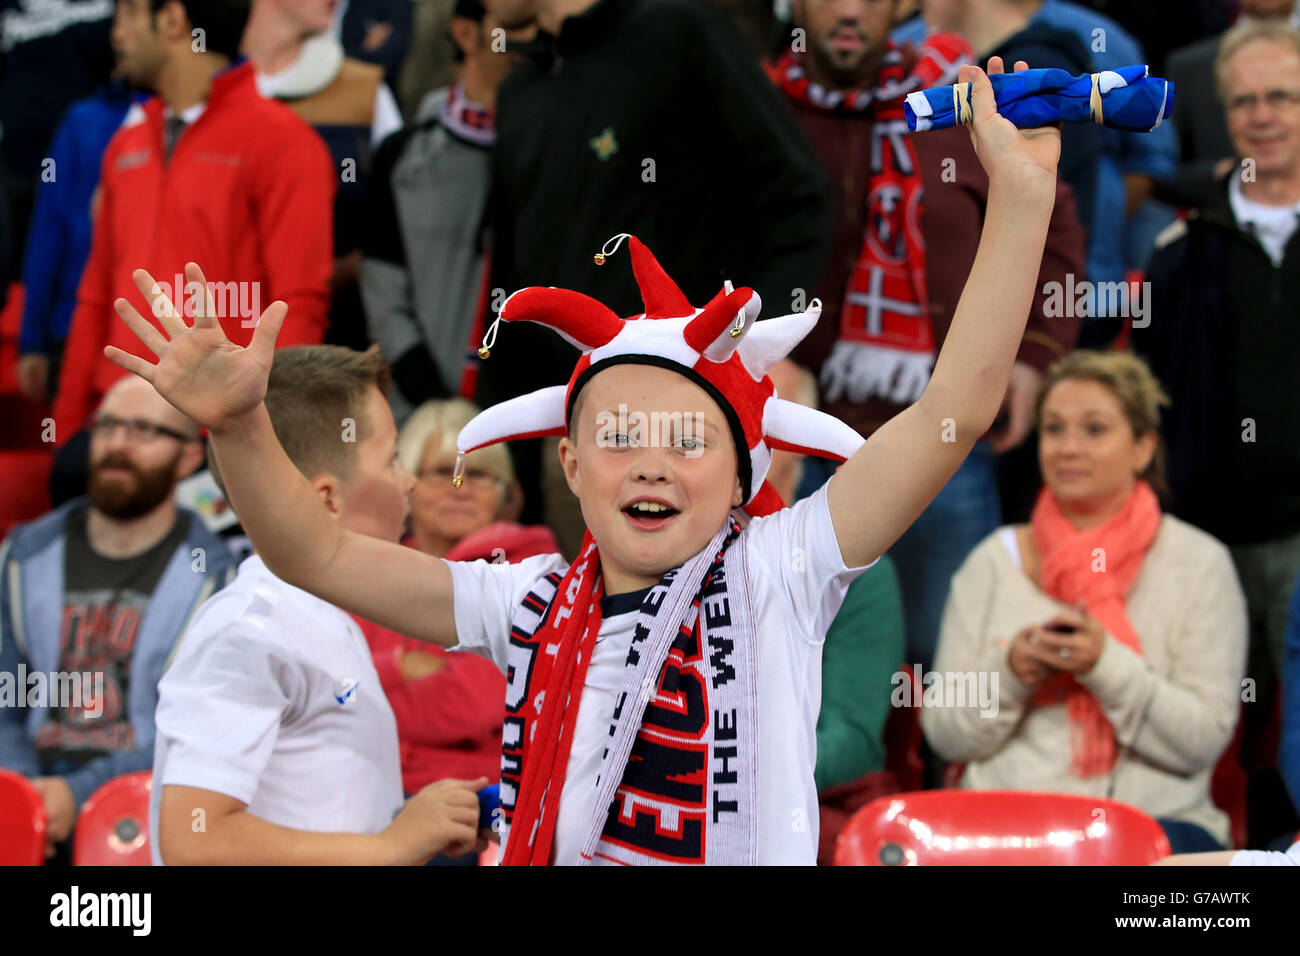 Soccer - International Friendly - England v Norway - Wembley Stadium. A Young England fan shows his support in the stands before the game Stock Photo